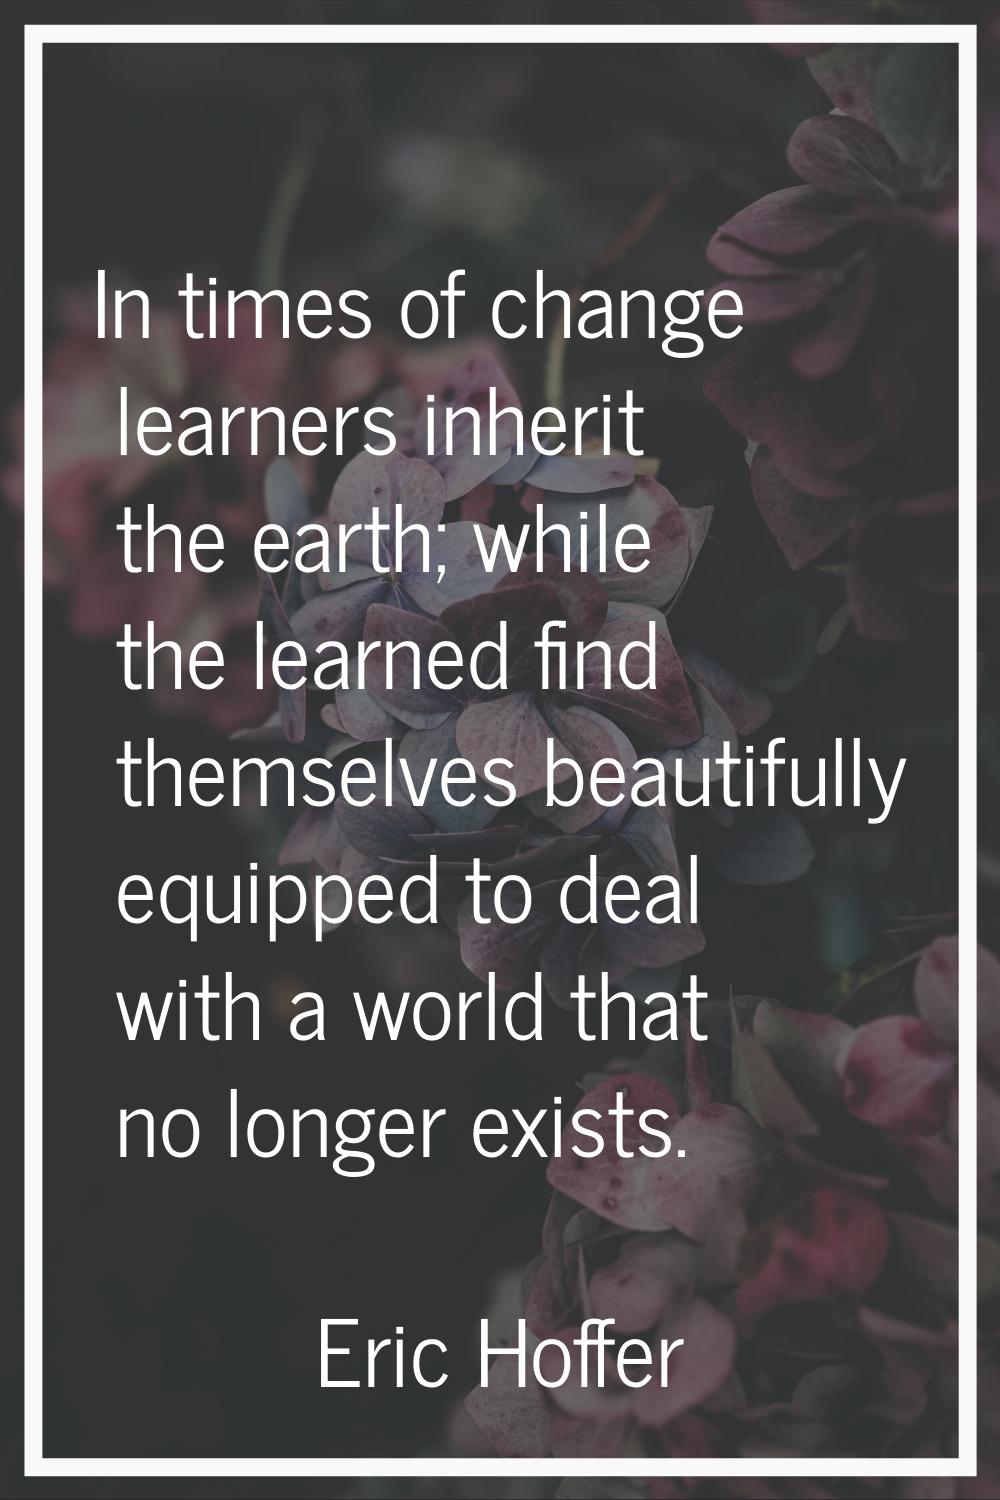 In times of change learners inherit the earth; while the learned find themselves beautifully equipp